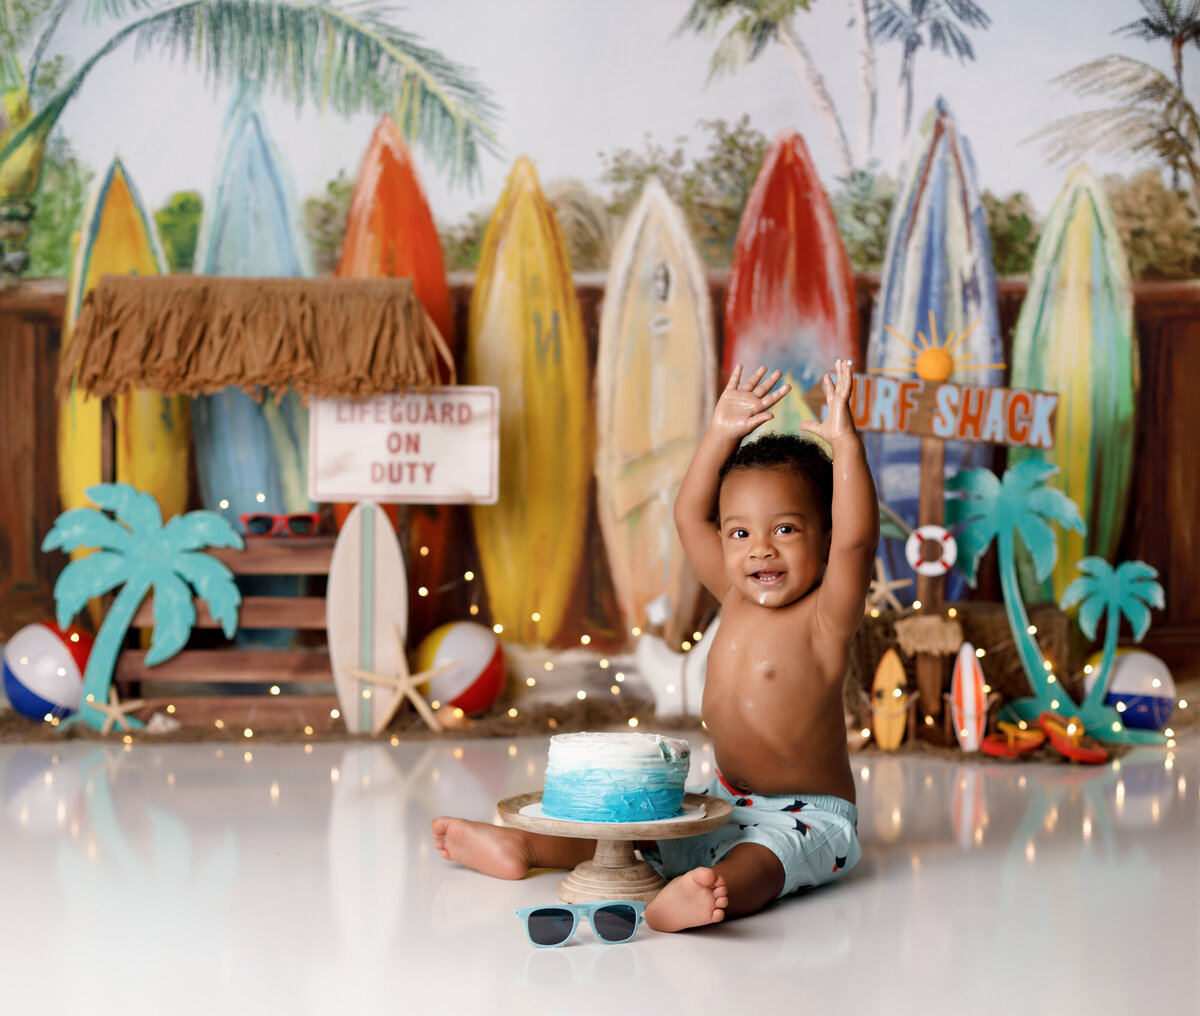 Surf and beach theme cake smash in Palm Beach and Boca Raton newborn and cake smash portrait studio. Baby boy is wearing light blue swim trunks sitting in front of an ombre Blue cake. In the background are various surfboards with a rustic tiki hut and surf shack sign. There are aqua palm trees and beach balls on the ground.